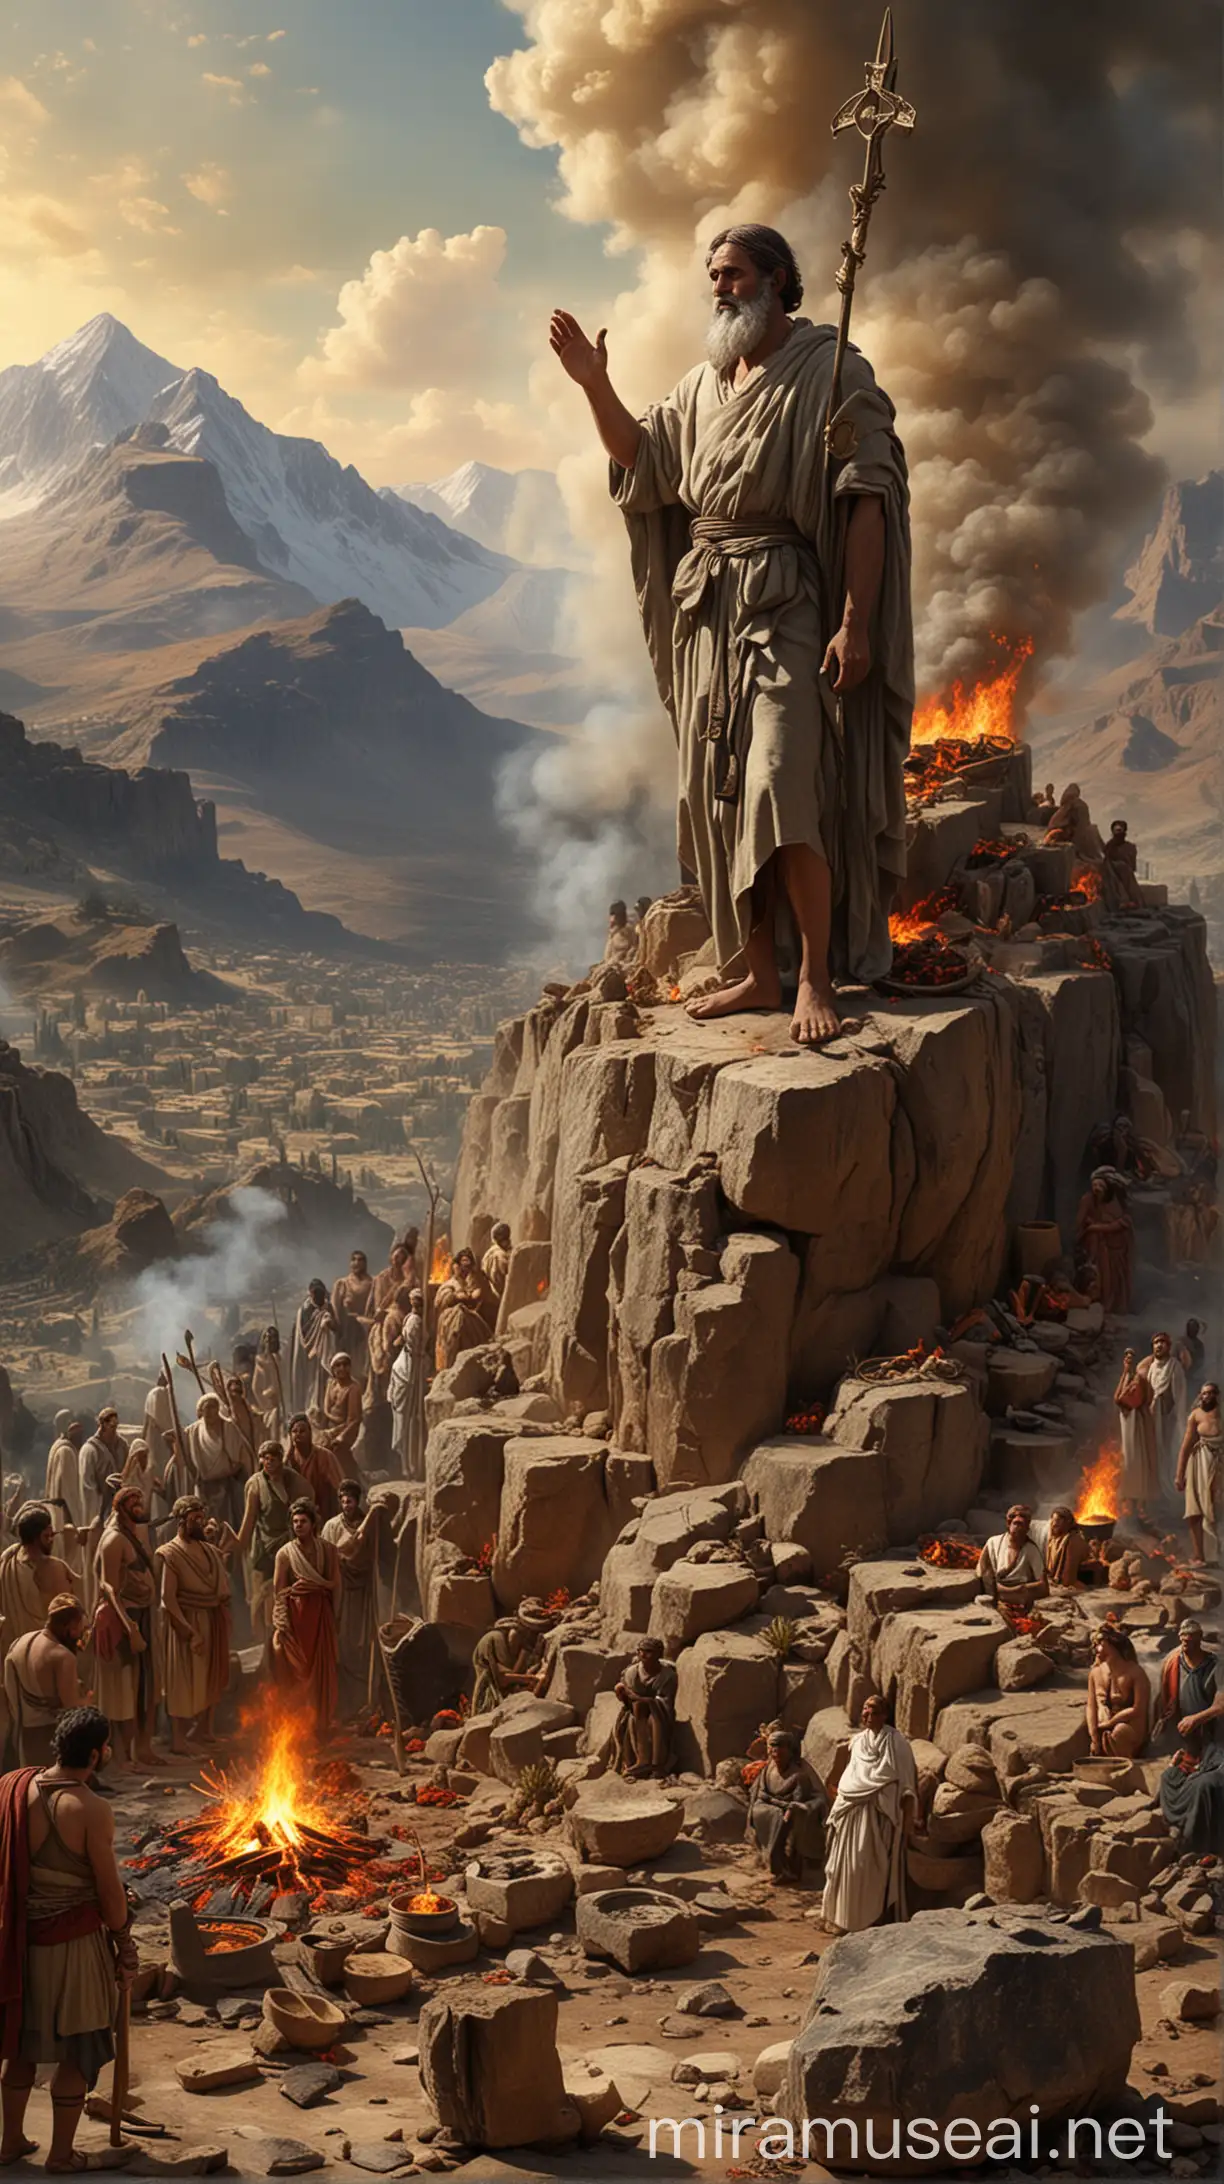 Create an image of Solomon standing on the highest mountain of Gibeon, preparing to offer 1,000 burnt offerings. The scene should depict an ancient, sacred atmosphere with a grand altar and smoke rising from the offerings."In ancient world 
